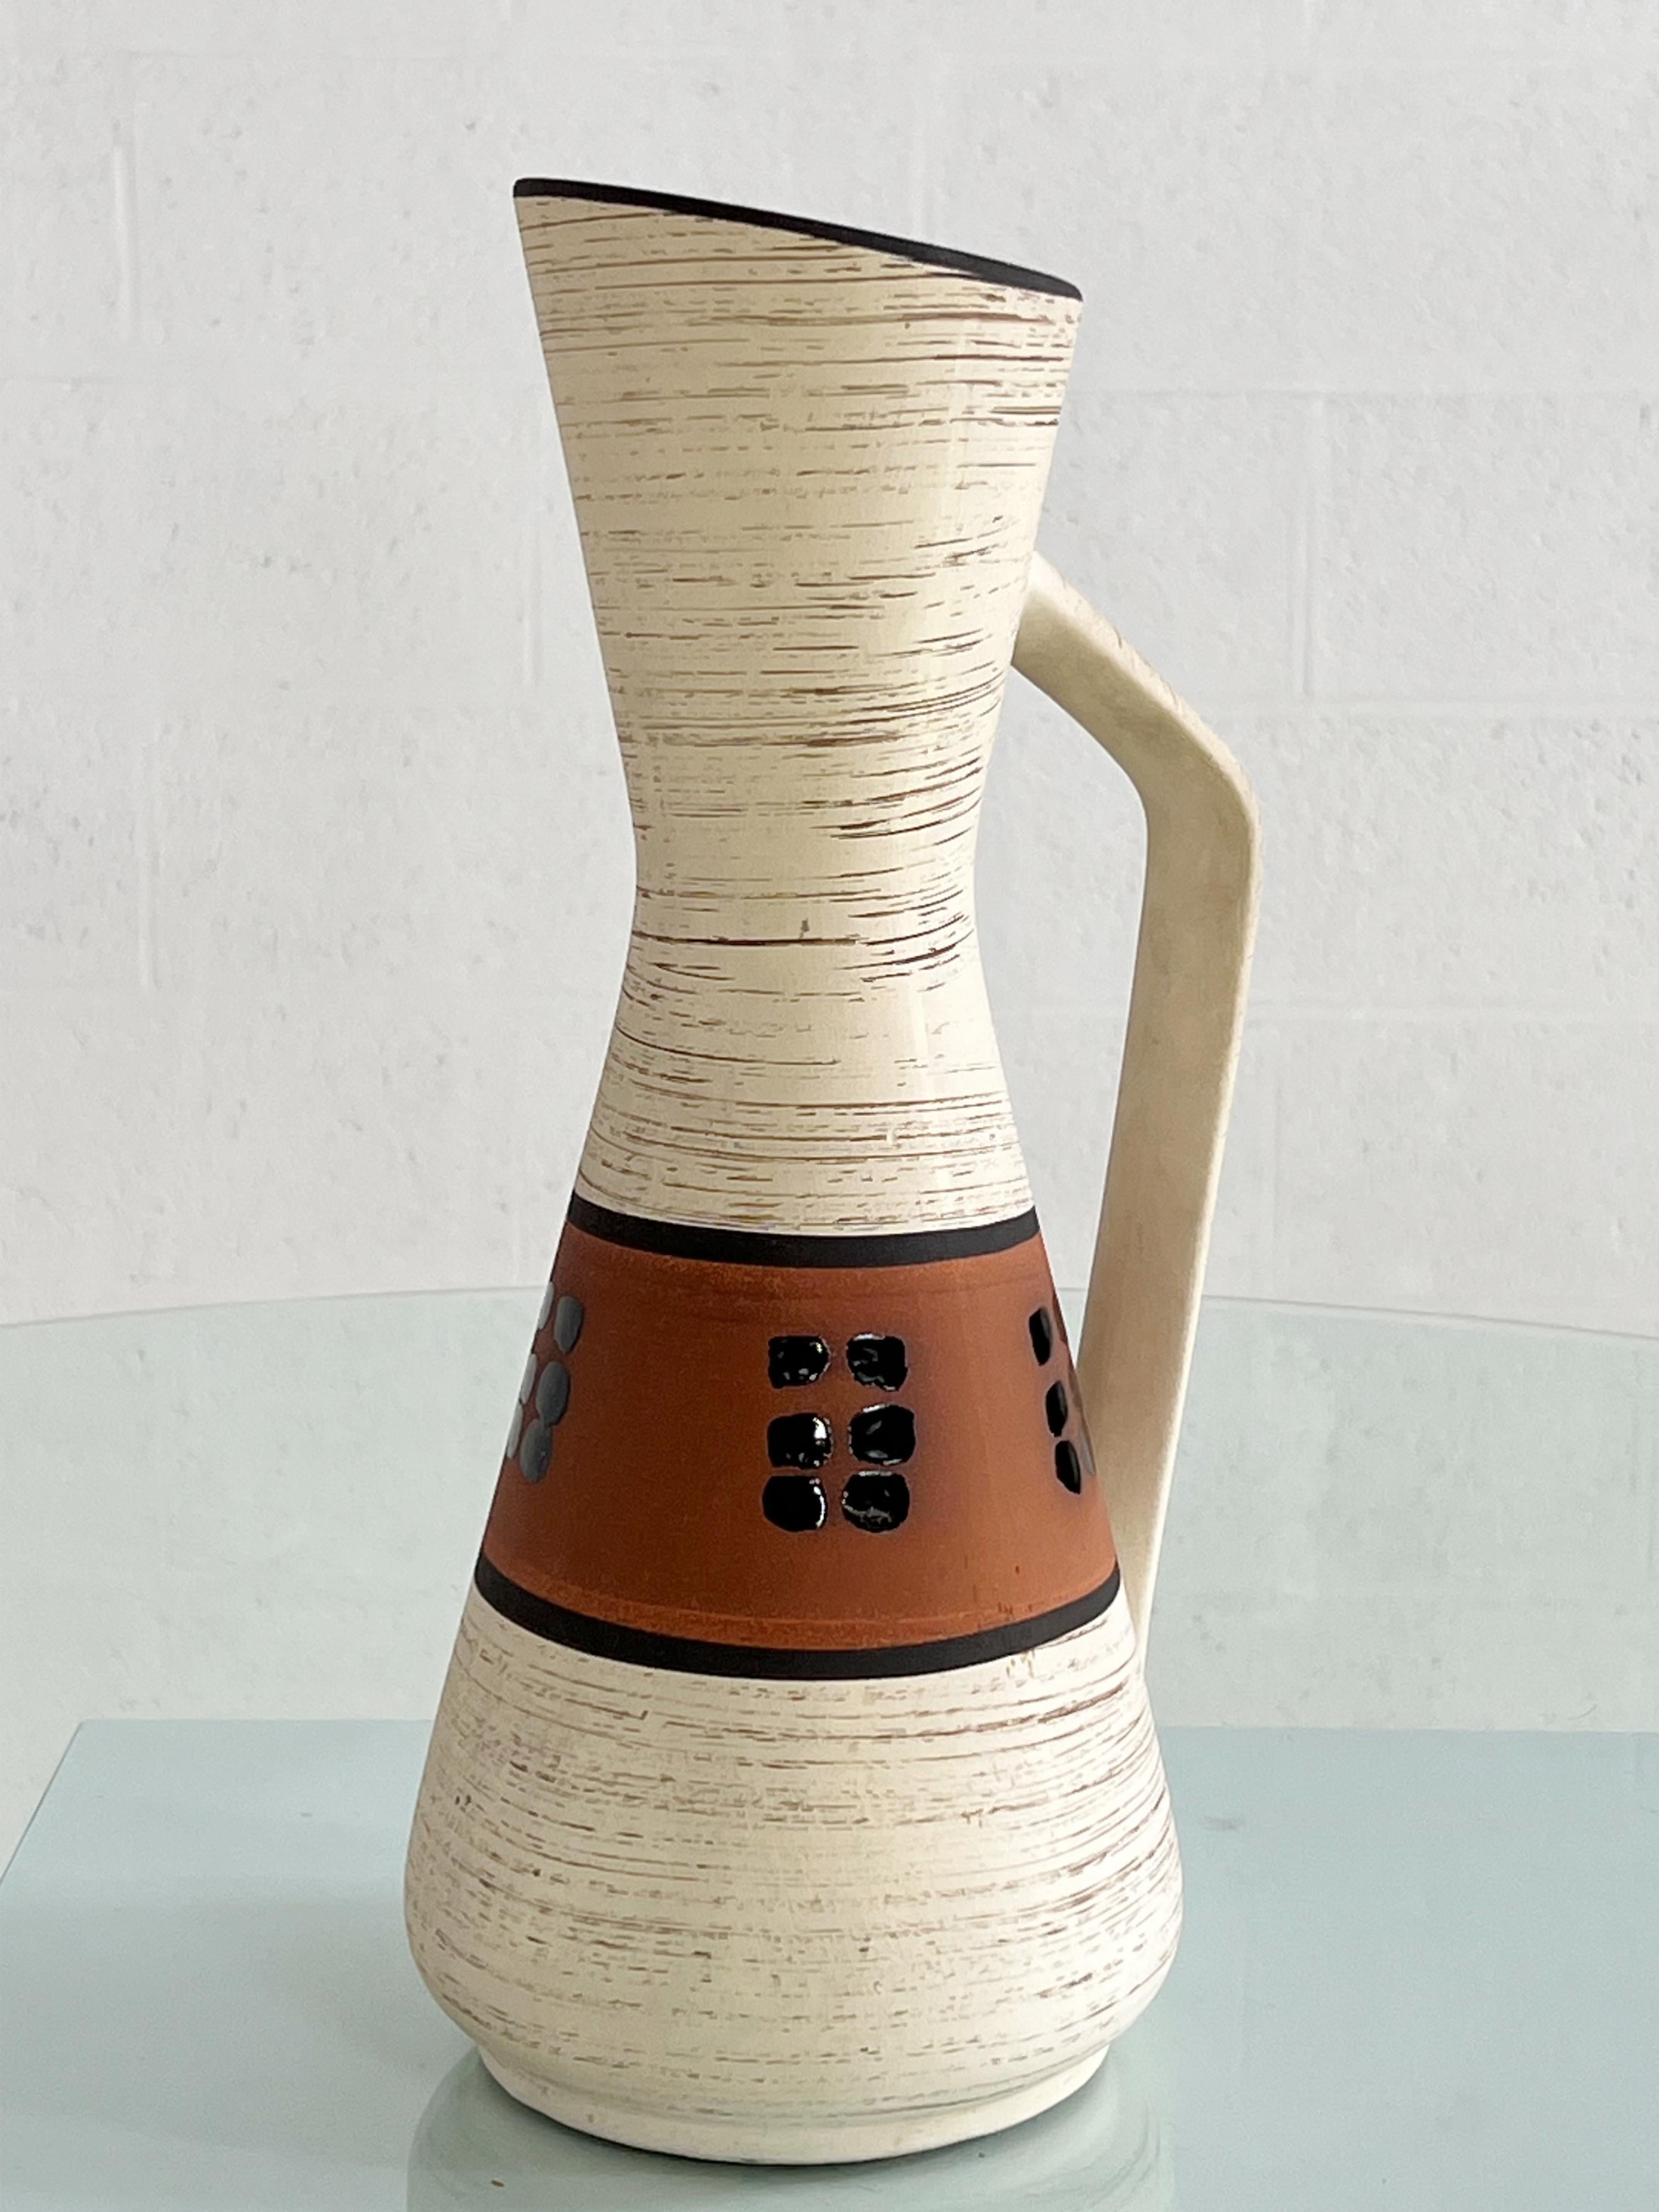 Space Age 1960s Handmade Ceramic Pitcher Vase For Sale